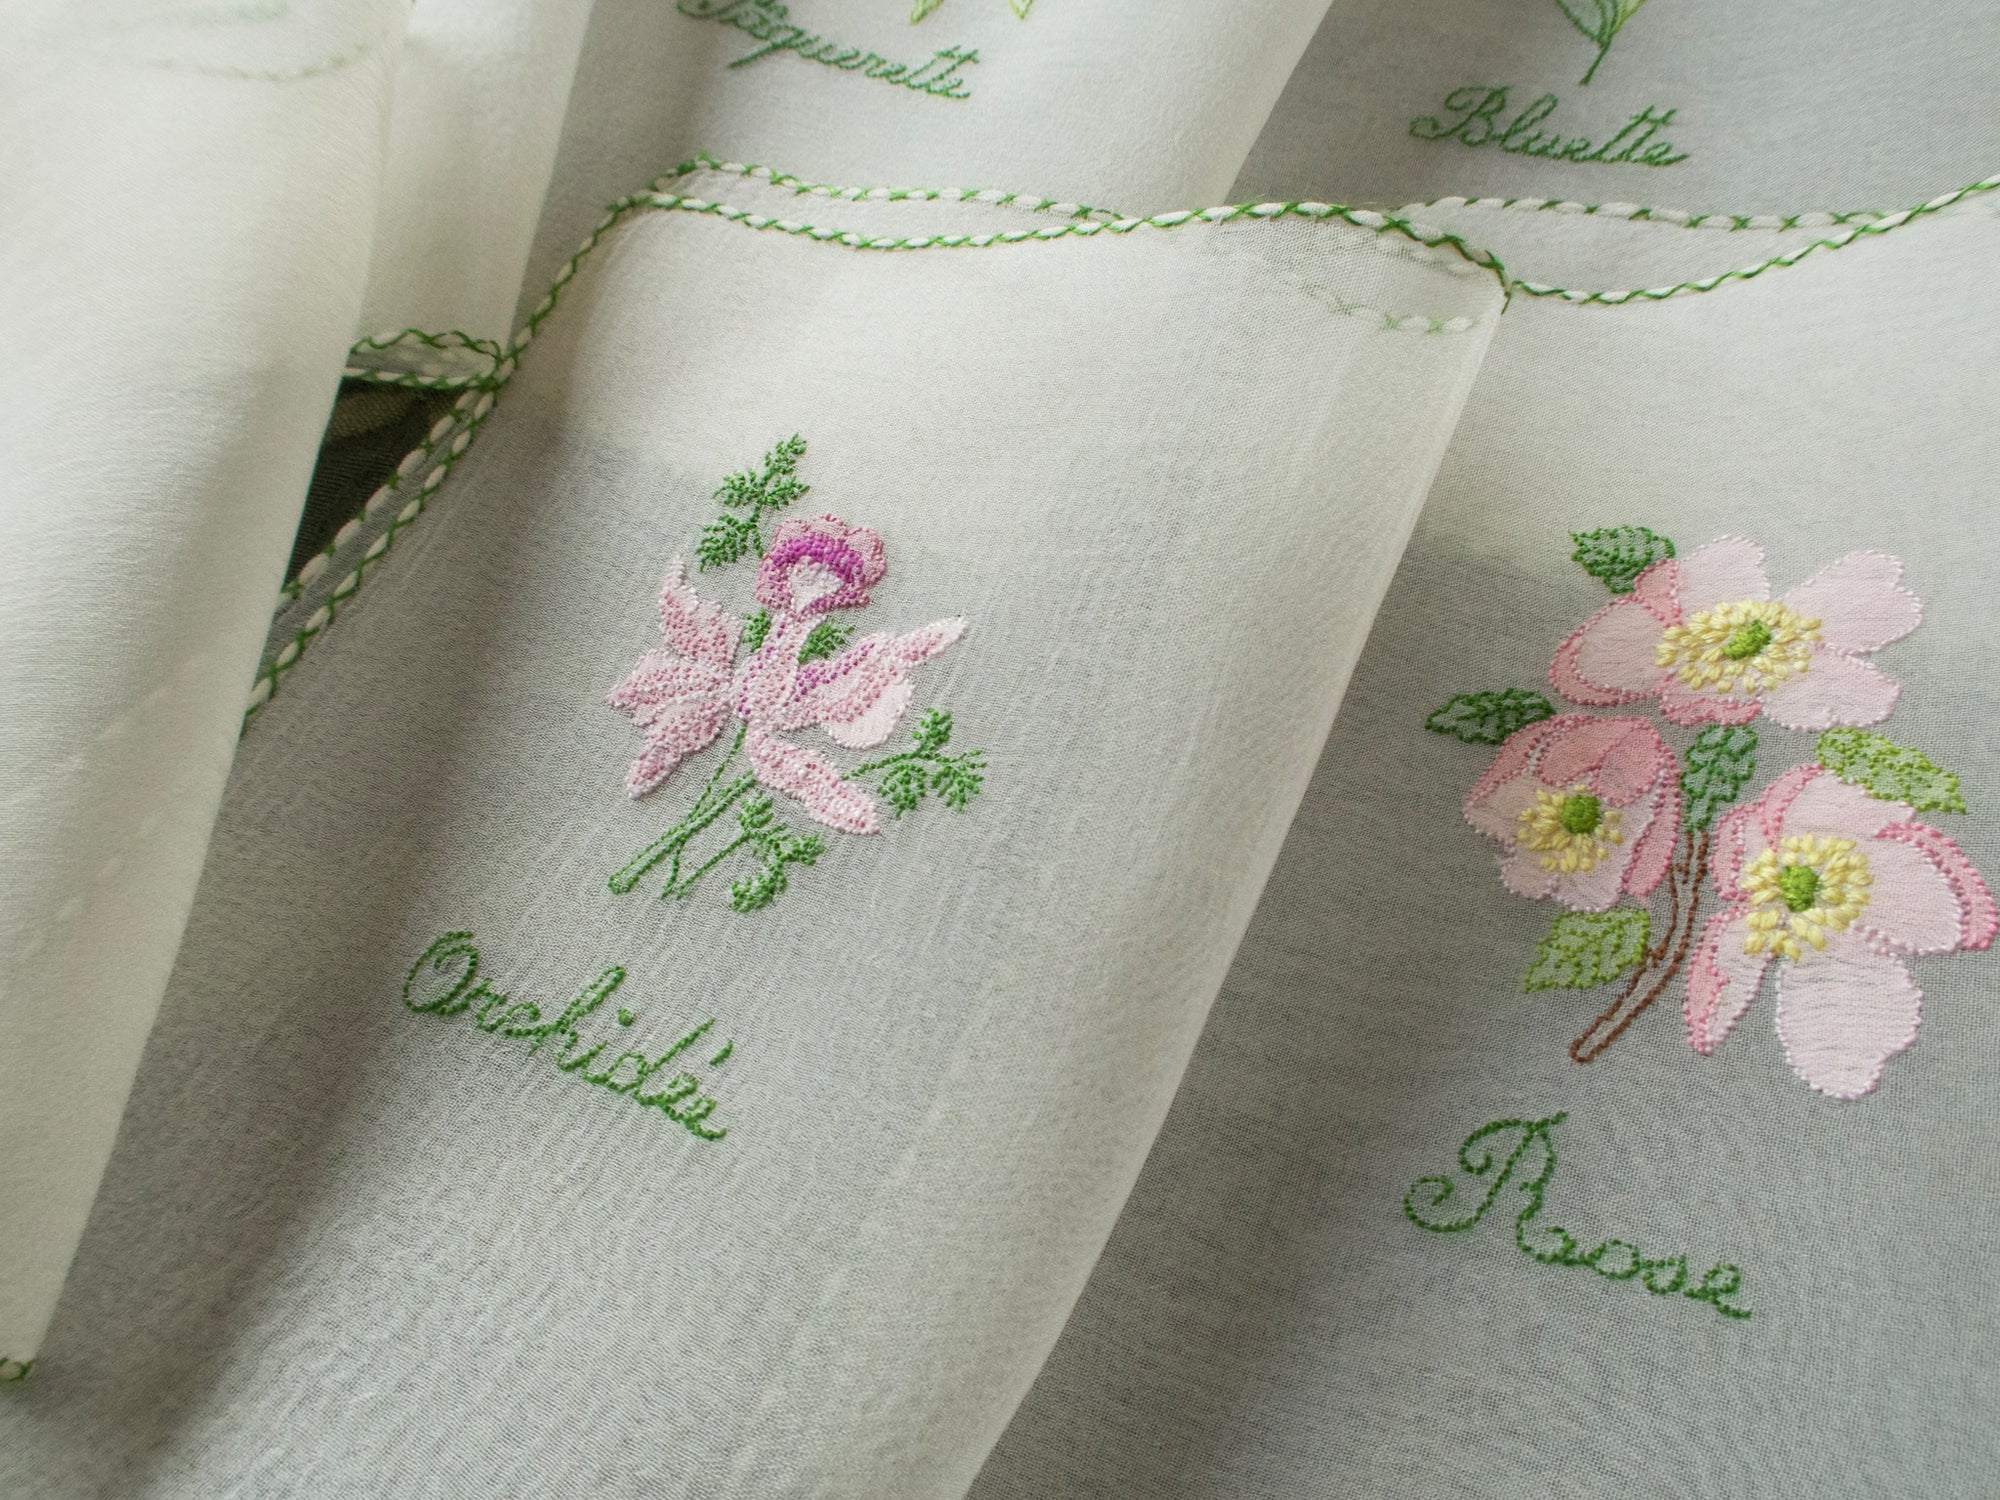 French Flowers Vintage Silk Chiffon Cocktail Napkins, Set of 12